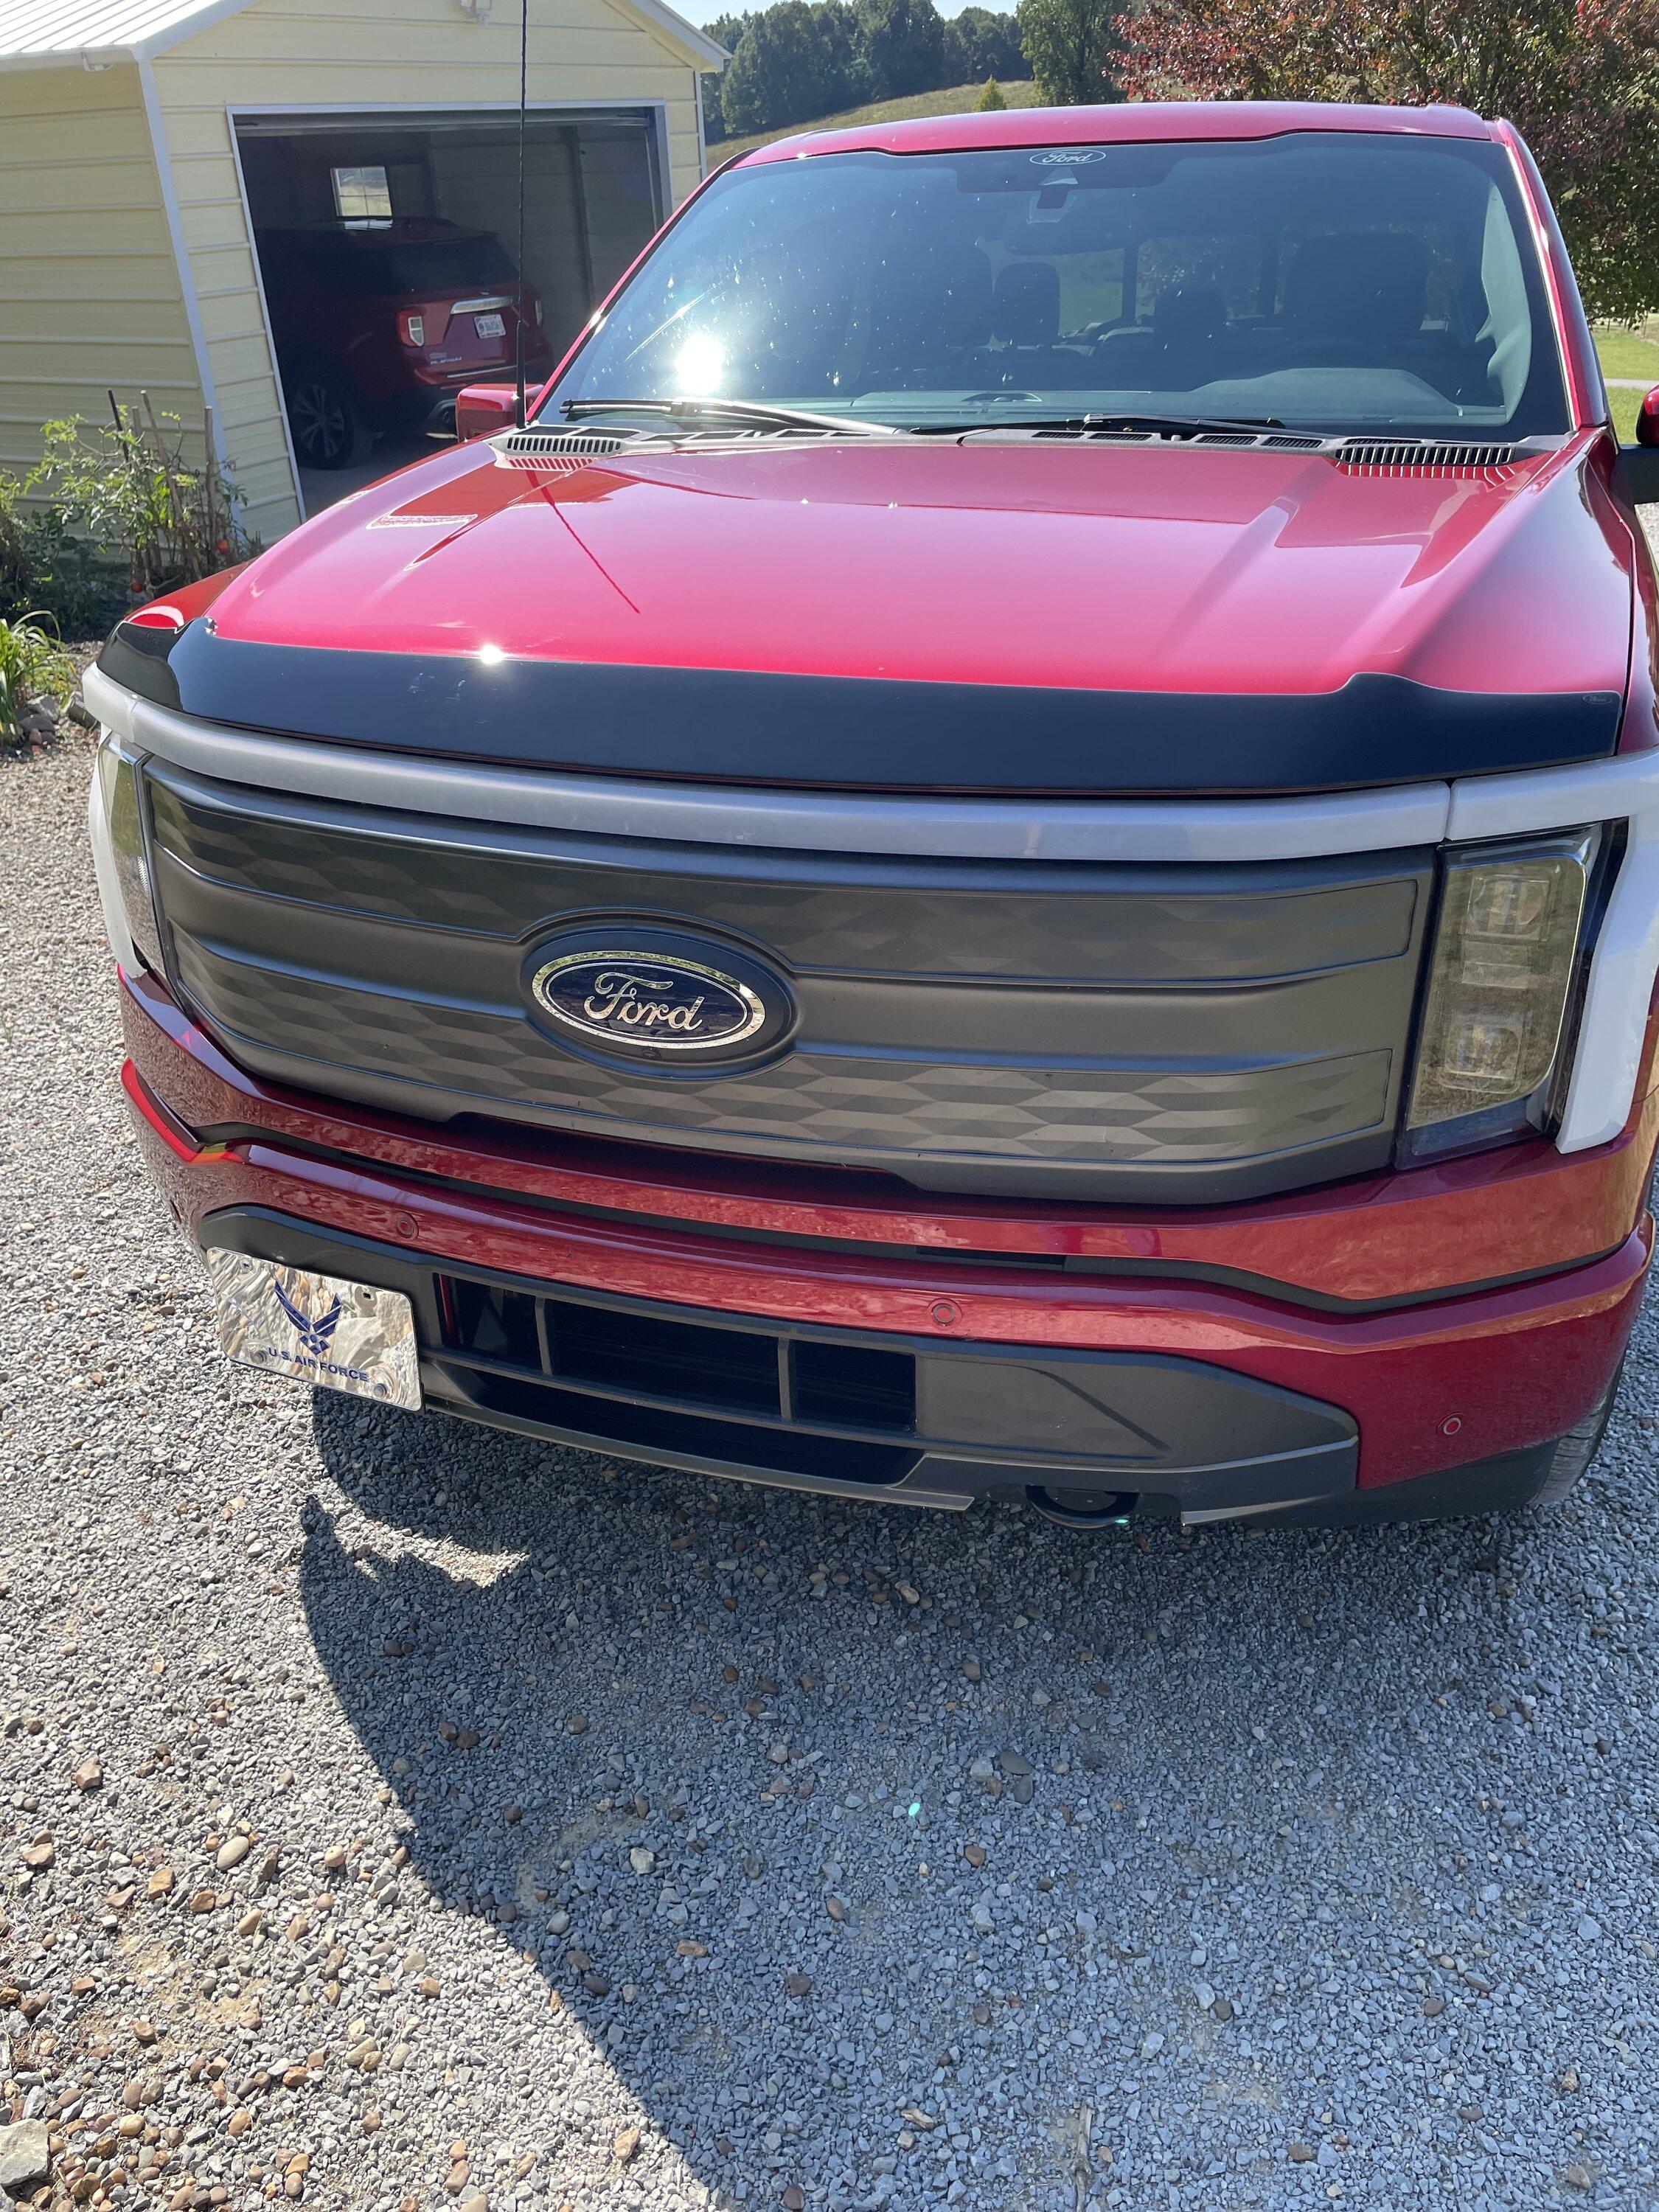 Ford F-150 Lightning 【BestEvMod】Let’s do a giveaway raffle on our Mud Flap! IMG_1803